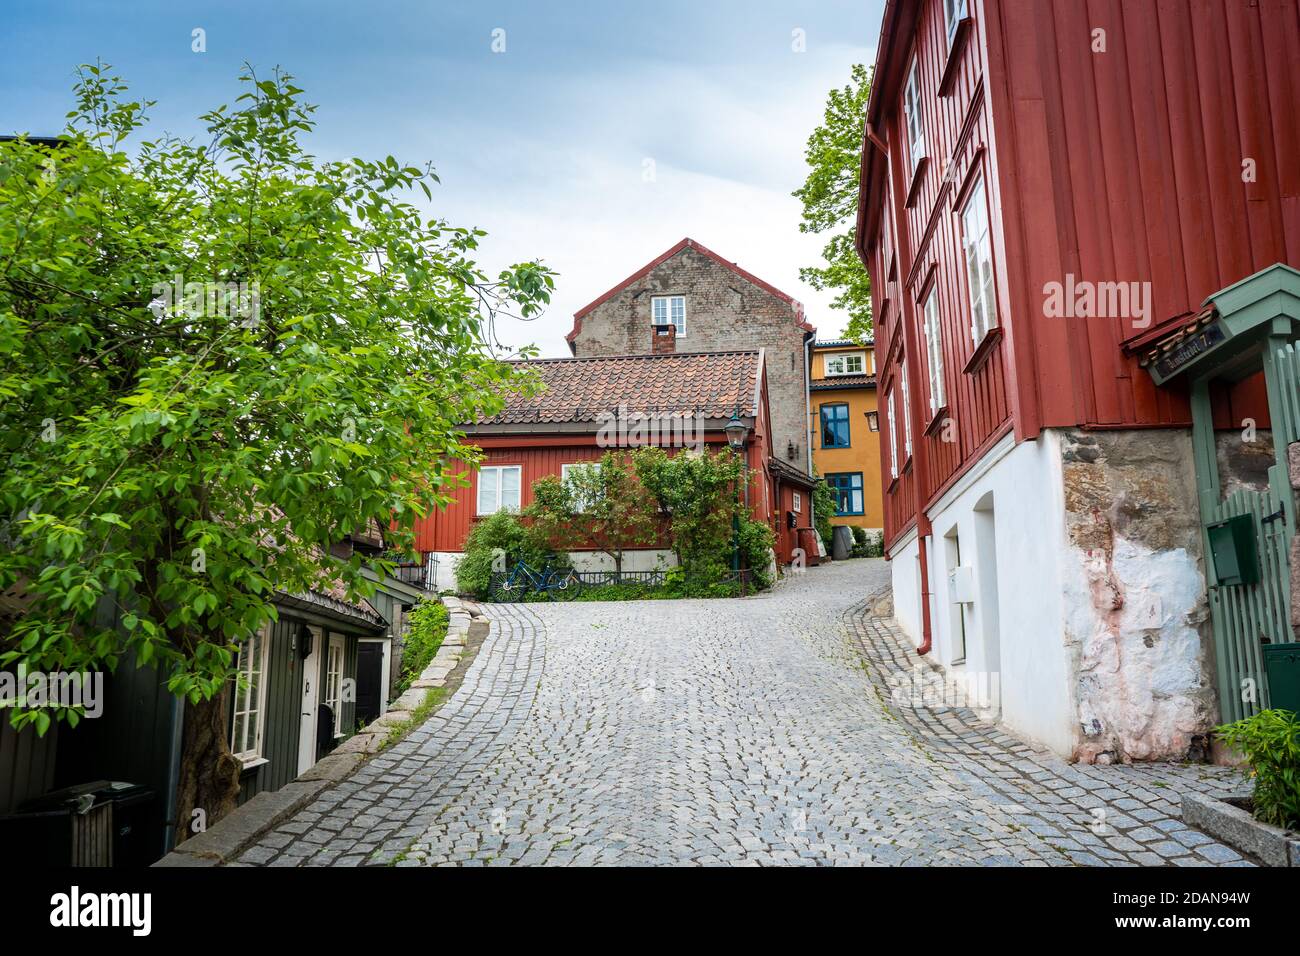 street in old cozy village in norway Stock Photo